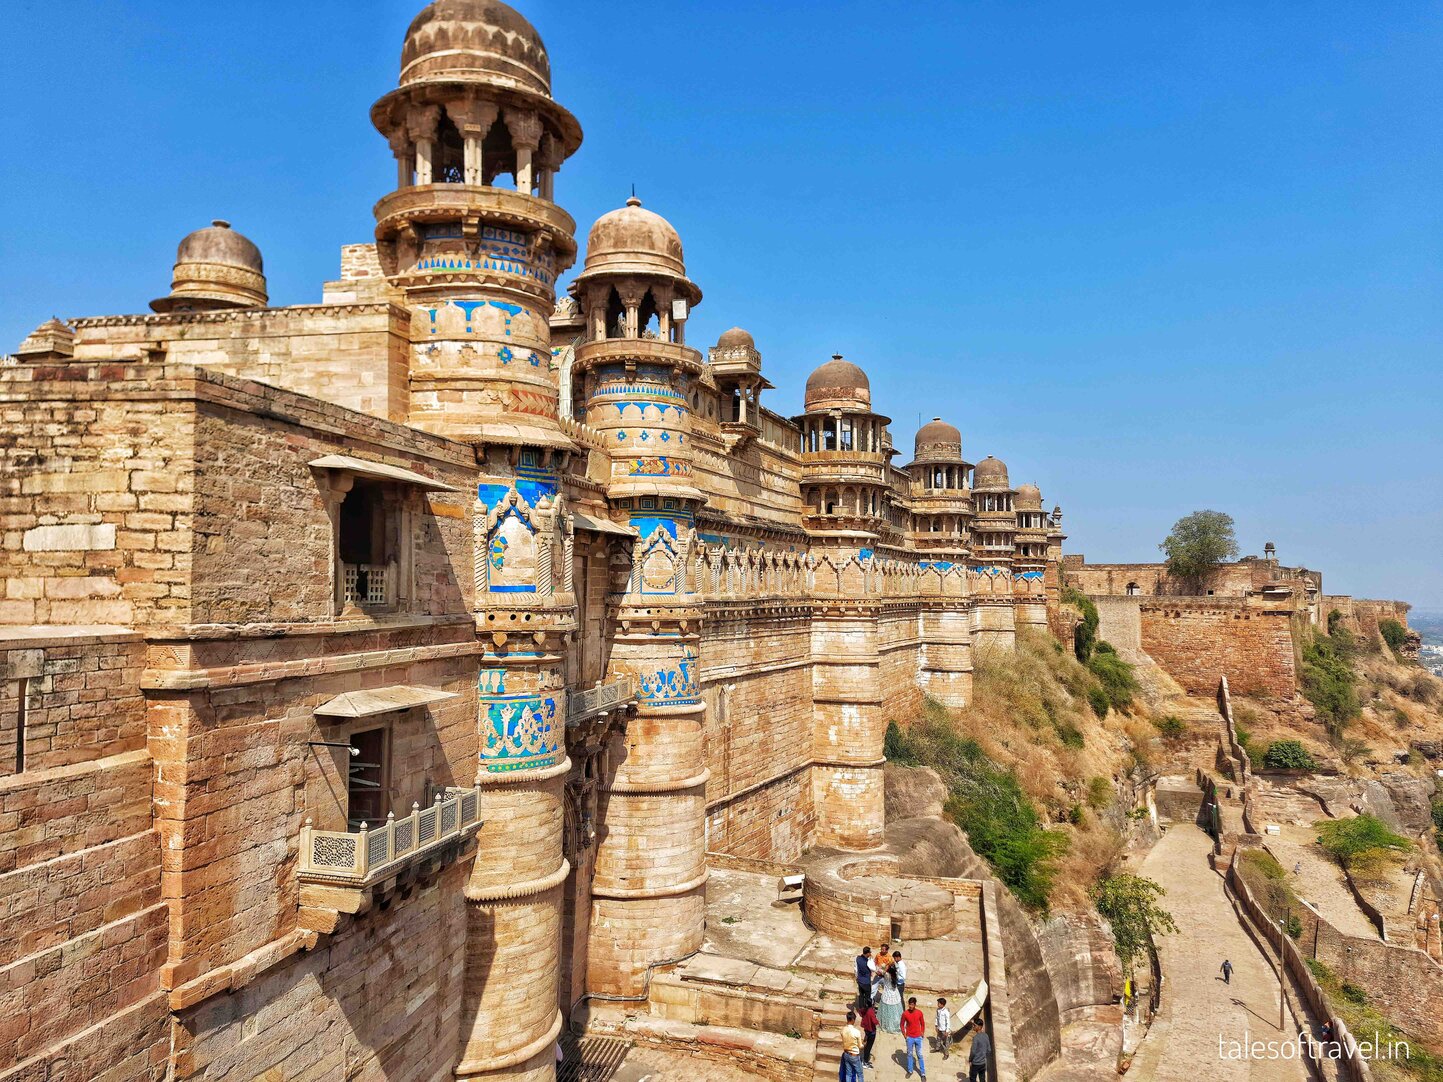 History of gwalior fort